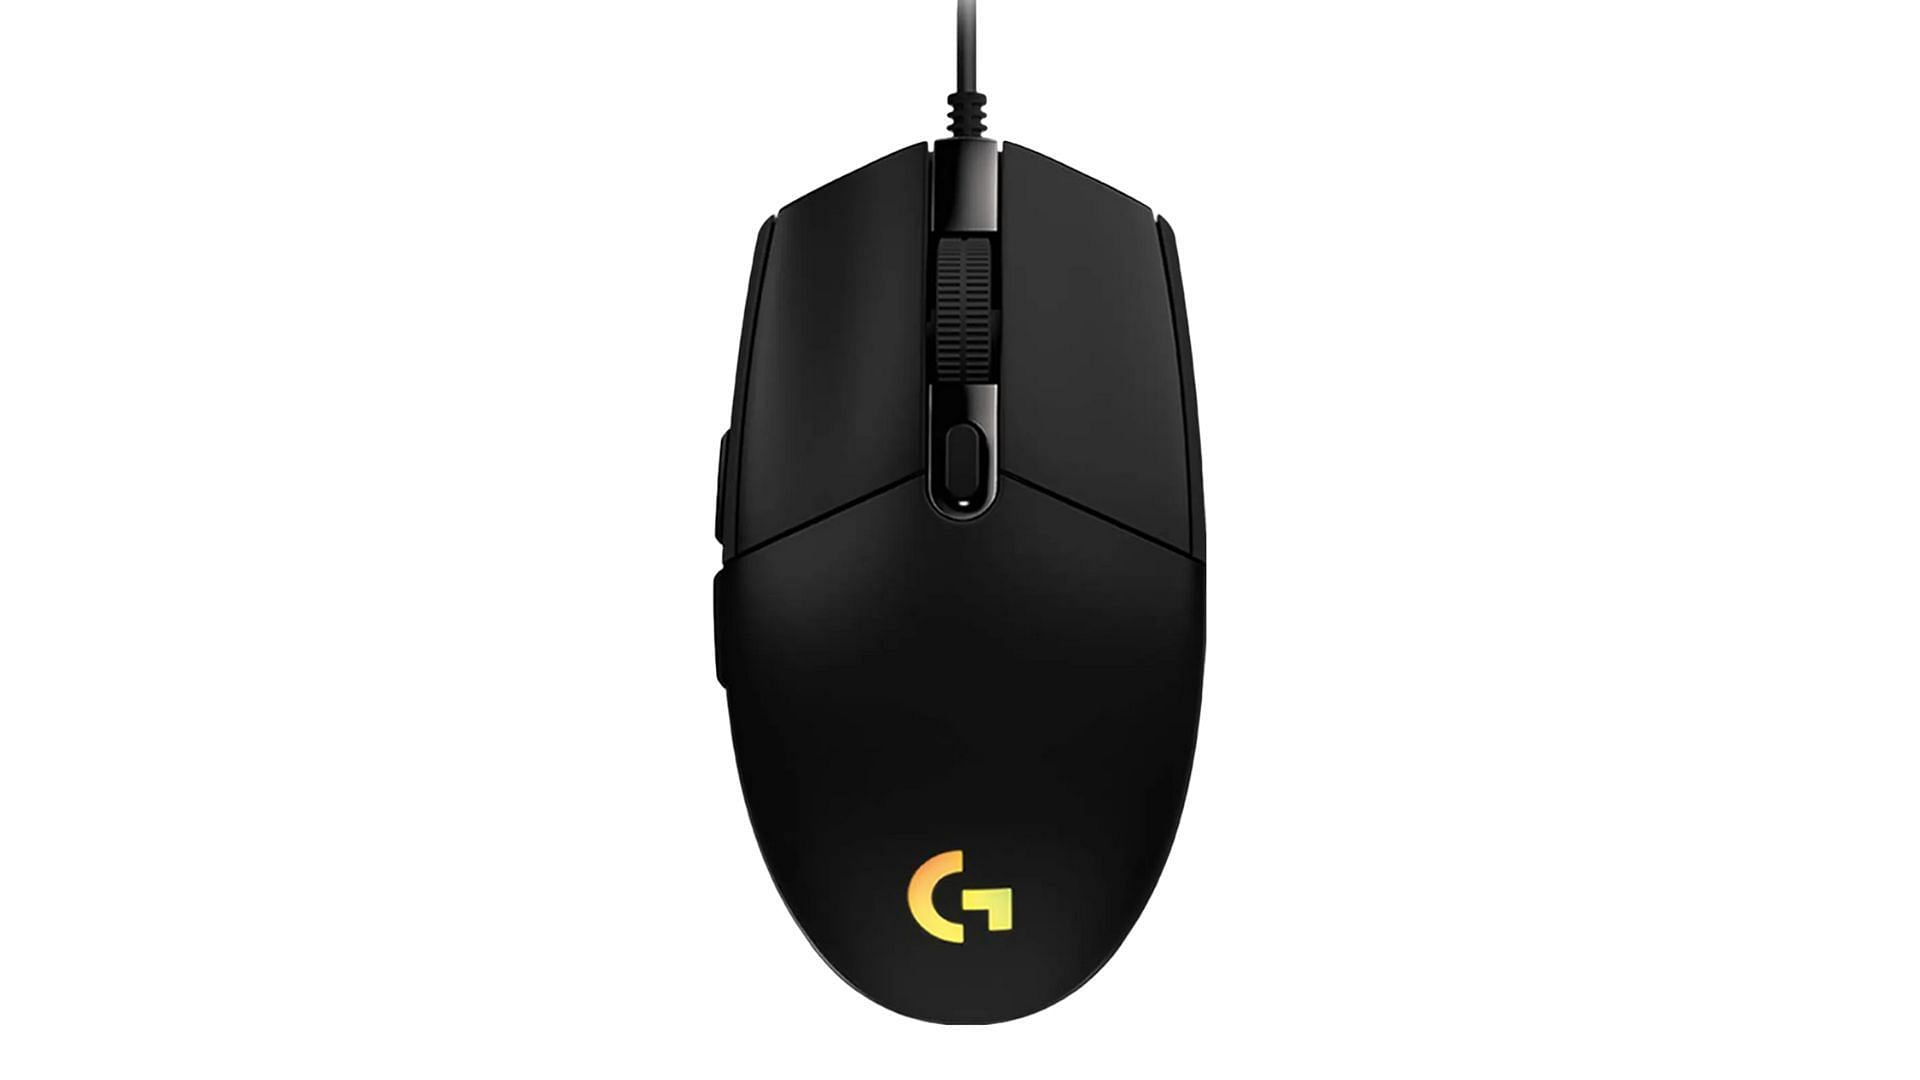 Logitech G203: the best affordable wired gaming mouse (Image via Logitech)